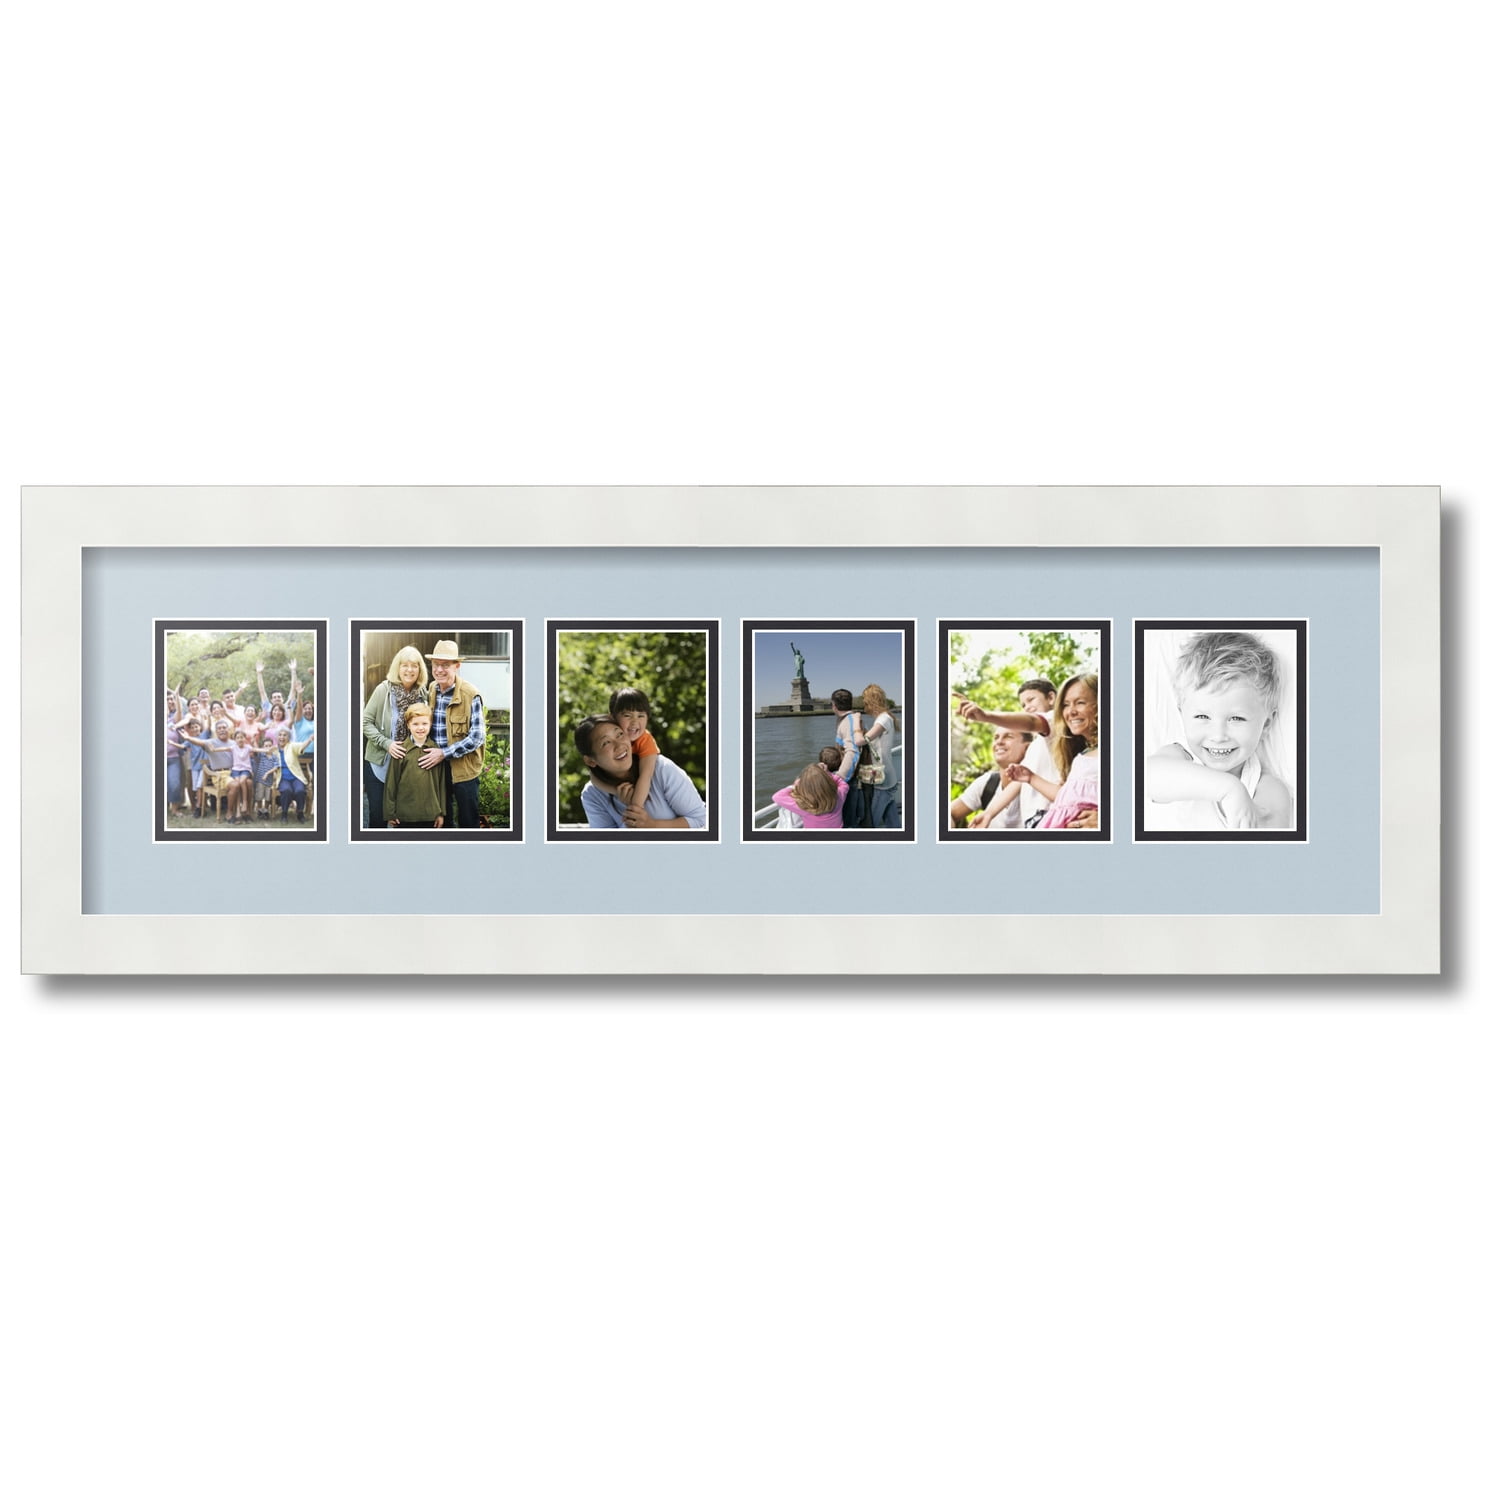 12 4x6 Collage Frame, Collage Picture Frame, Opening Frame, White MDF Frame,  Family Photo Frame, Family Portrait Frame,arttoframes,228-3966 